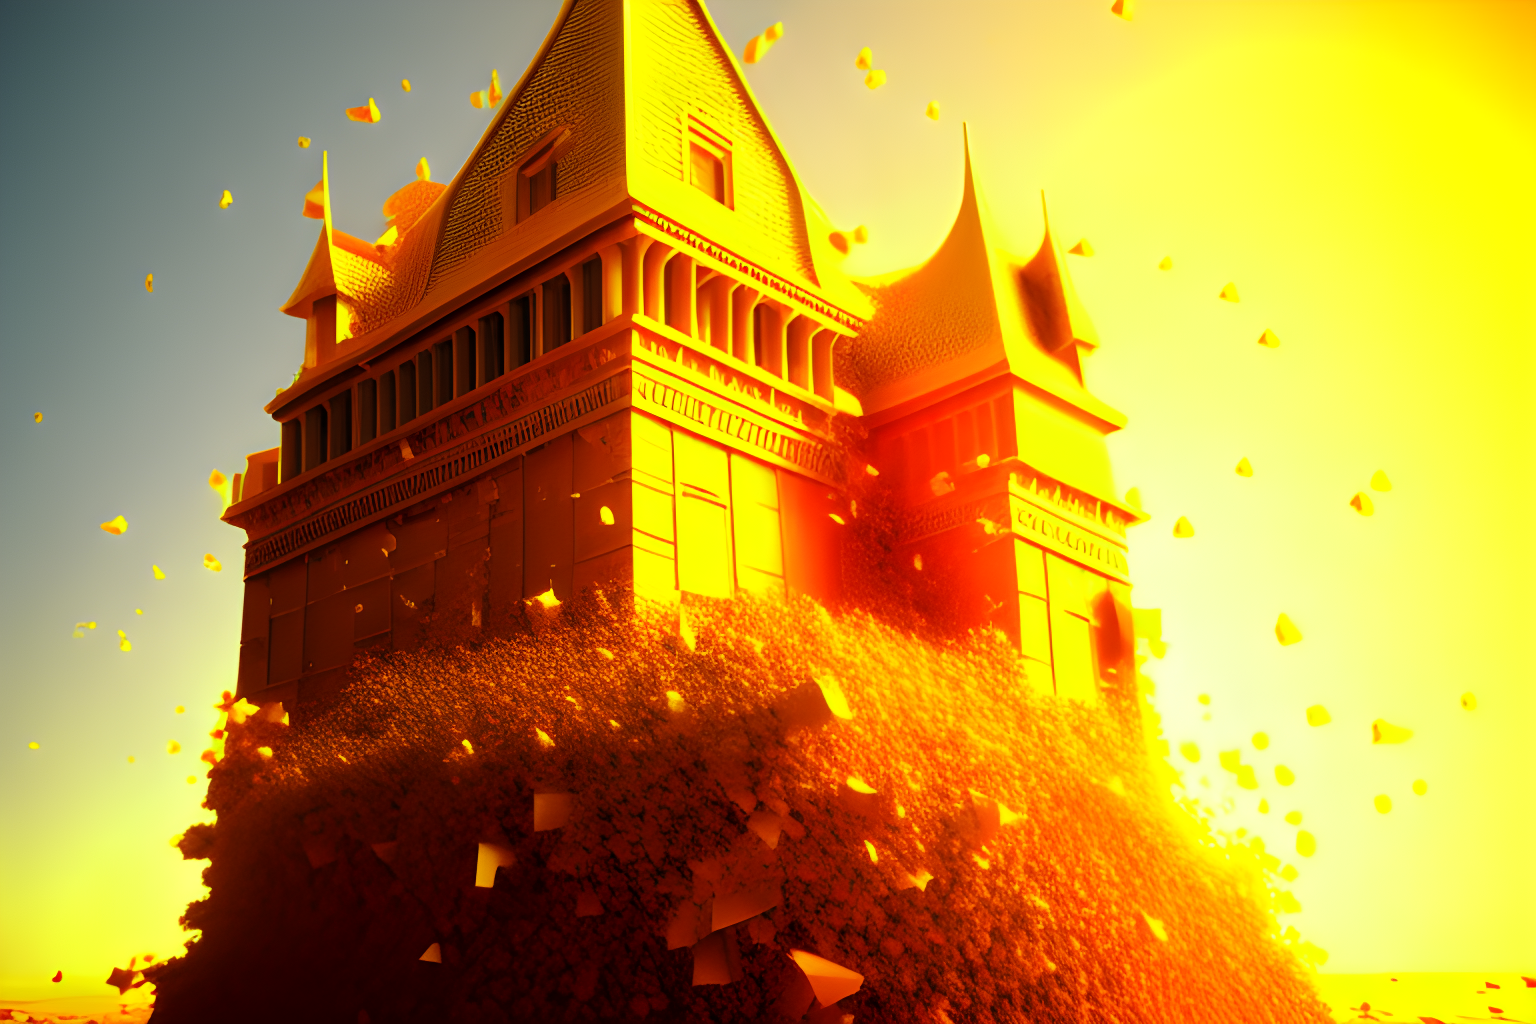 a golden castle collapsing and crashing